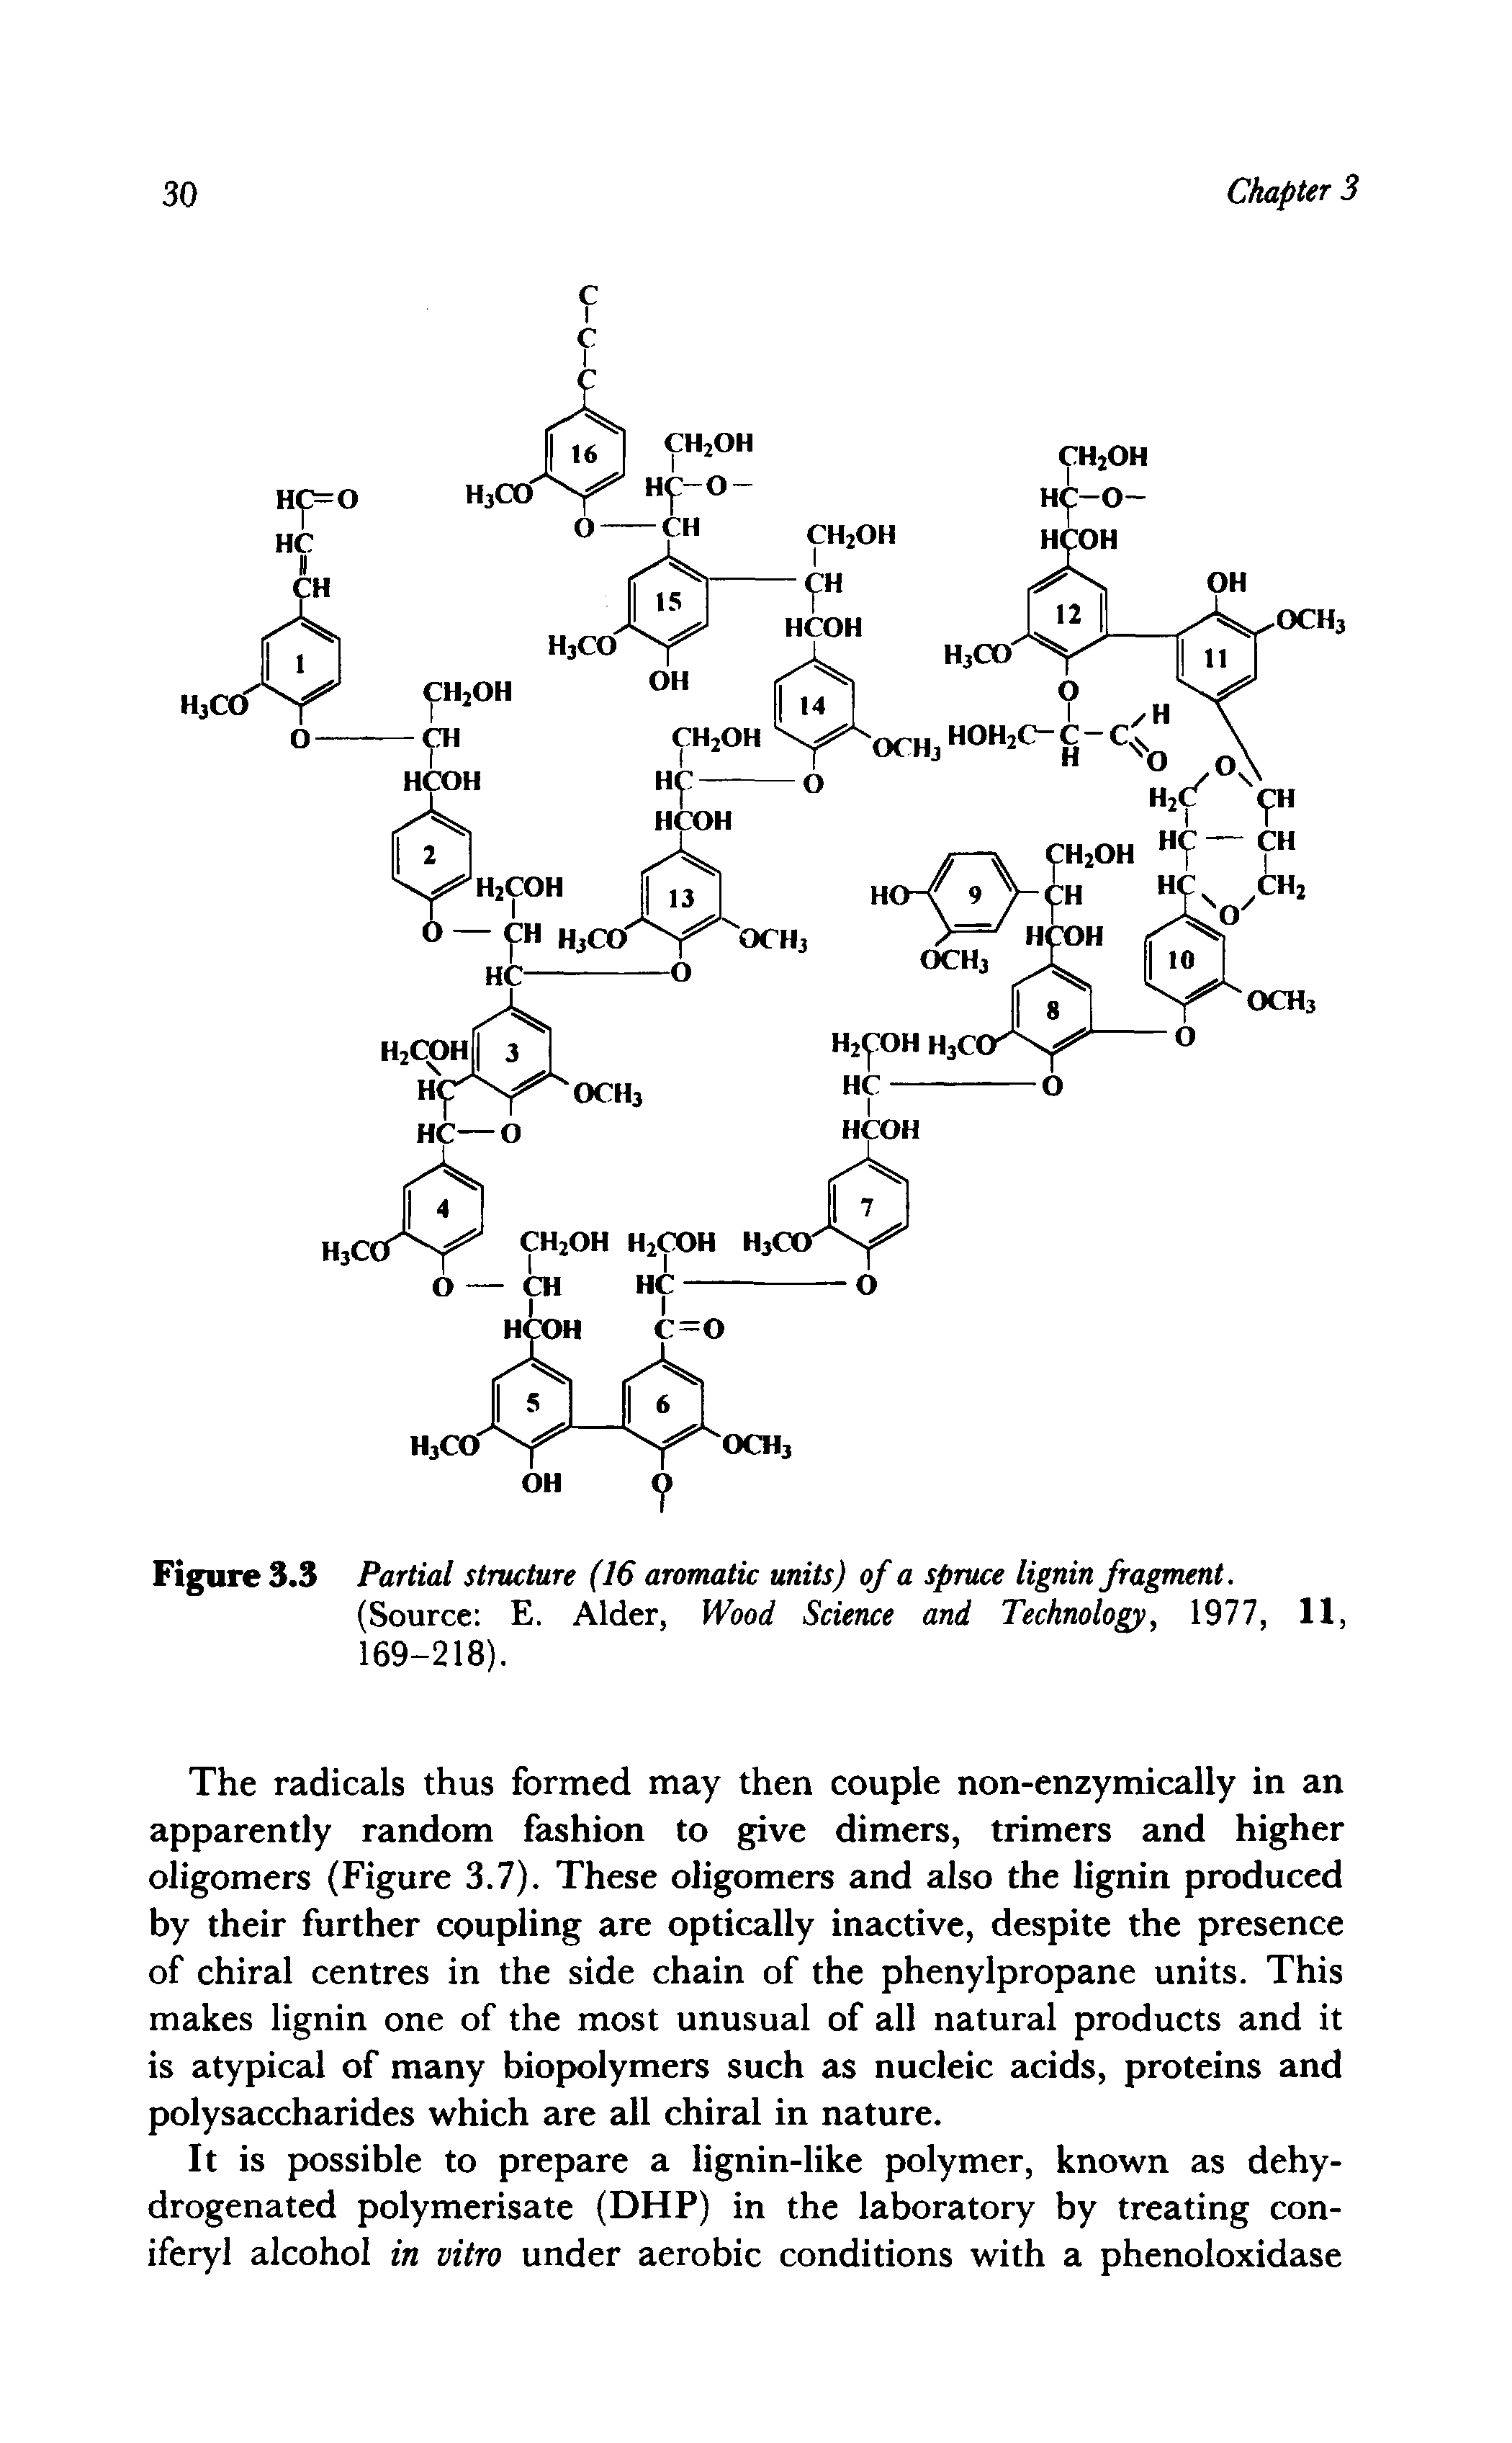 Figure 3.3 Partial structure (16 aromatic units) of a spruce lignin fragment.